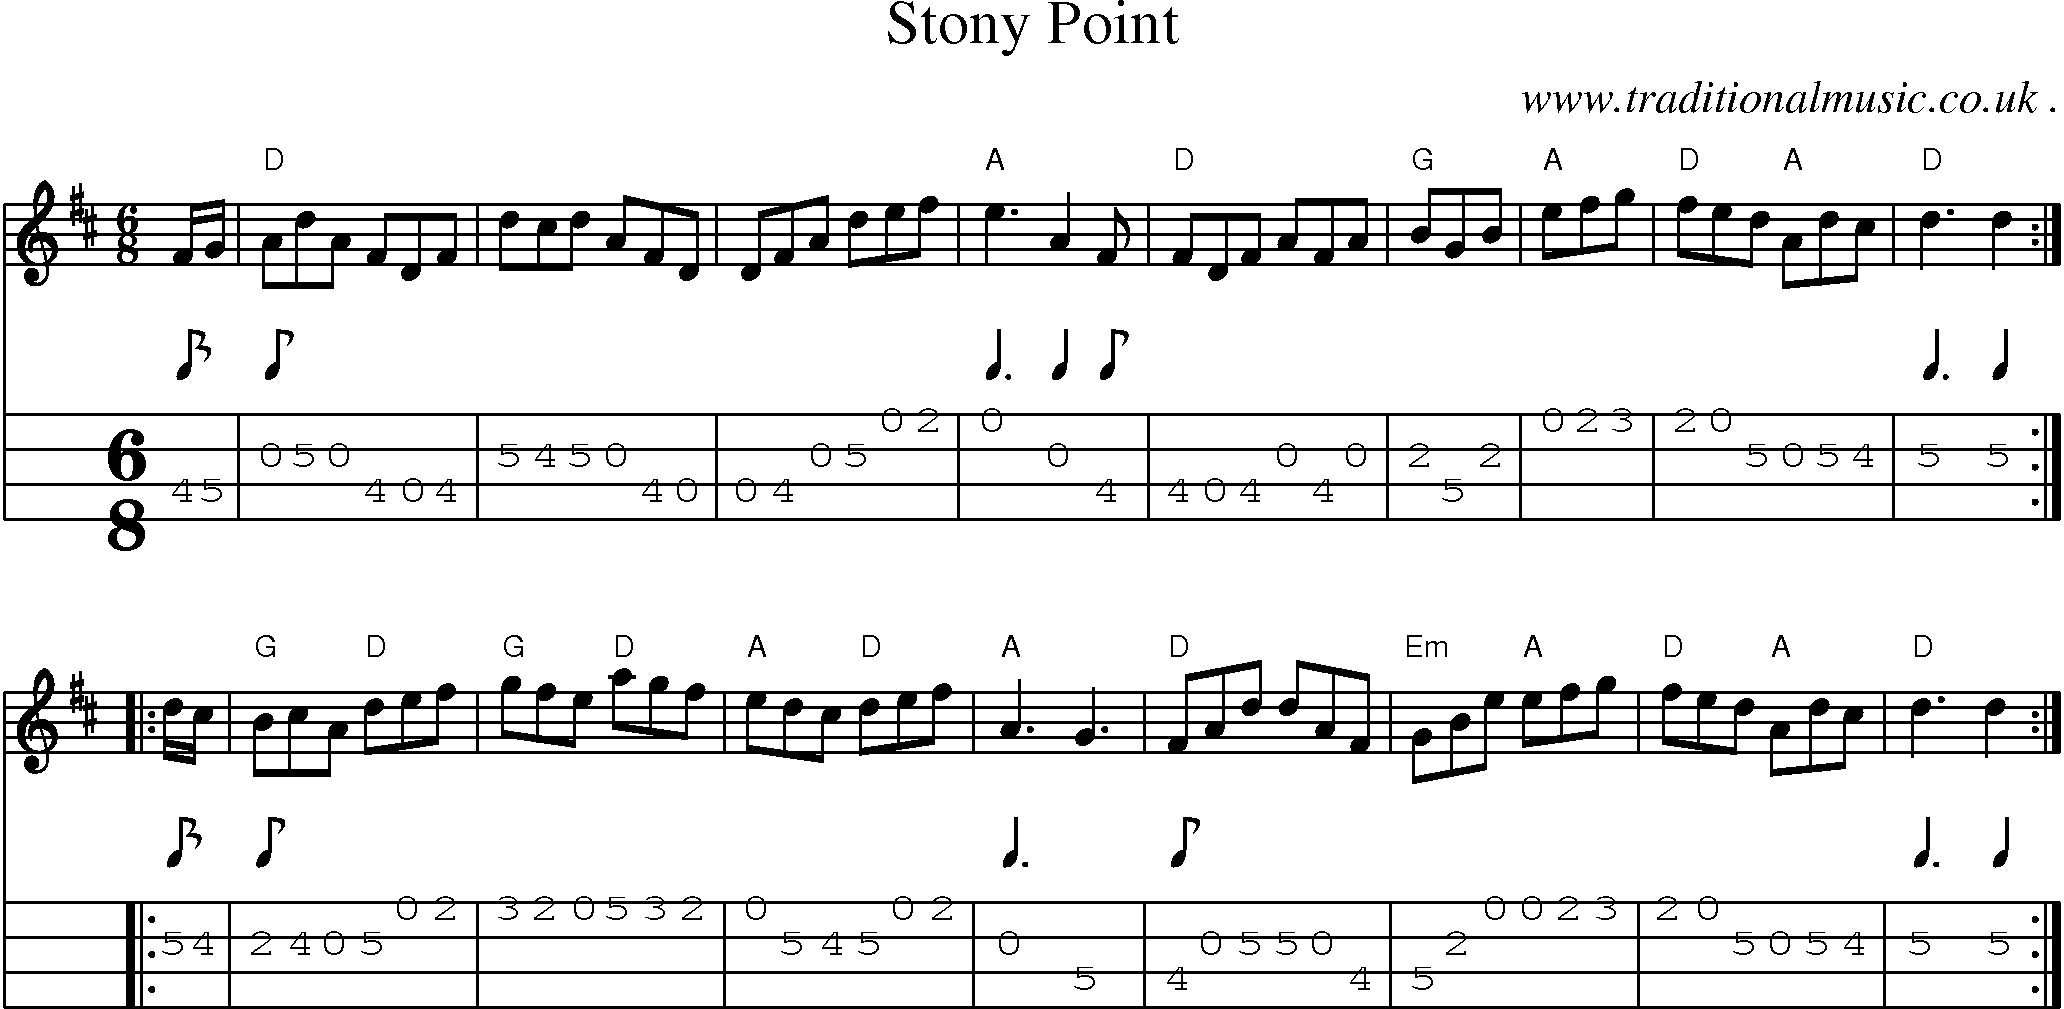 Sheet-music  score, Chords and Mandolin Tabs for Stony Point